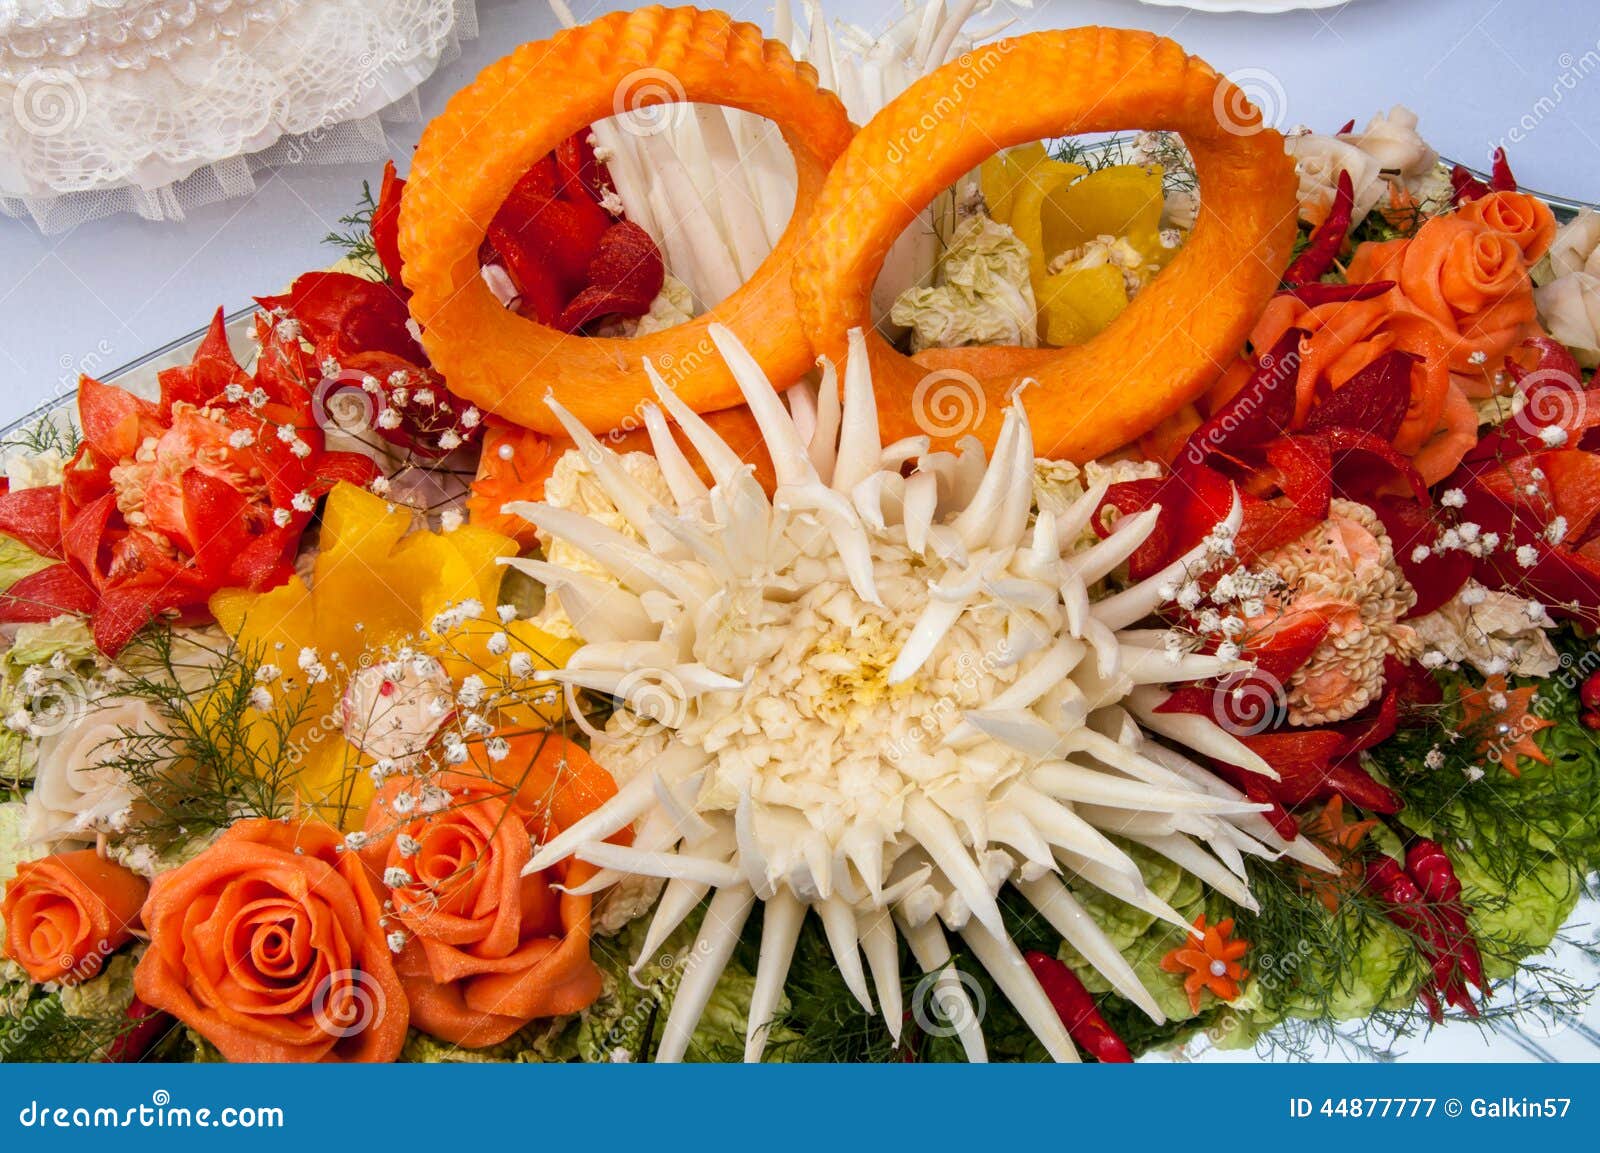 Carving Or Decoration Of Vegetables Stock Image - Image ...